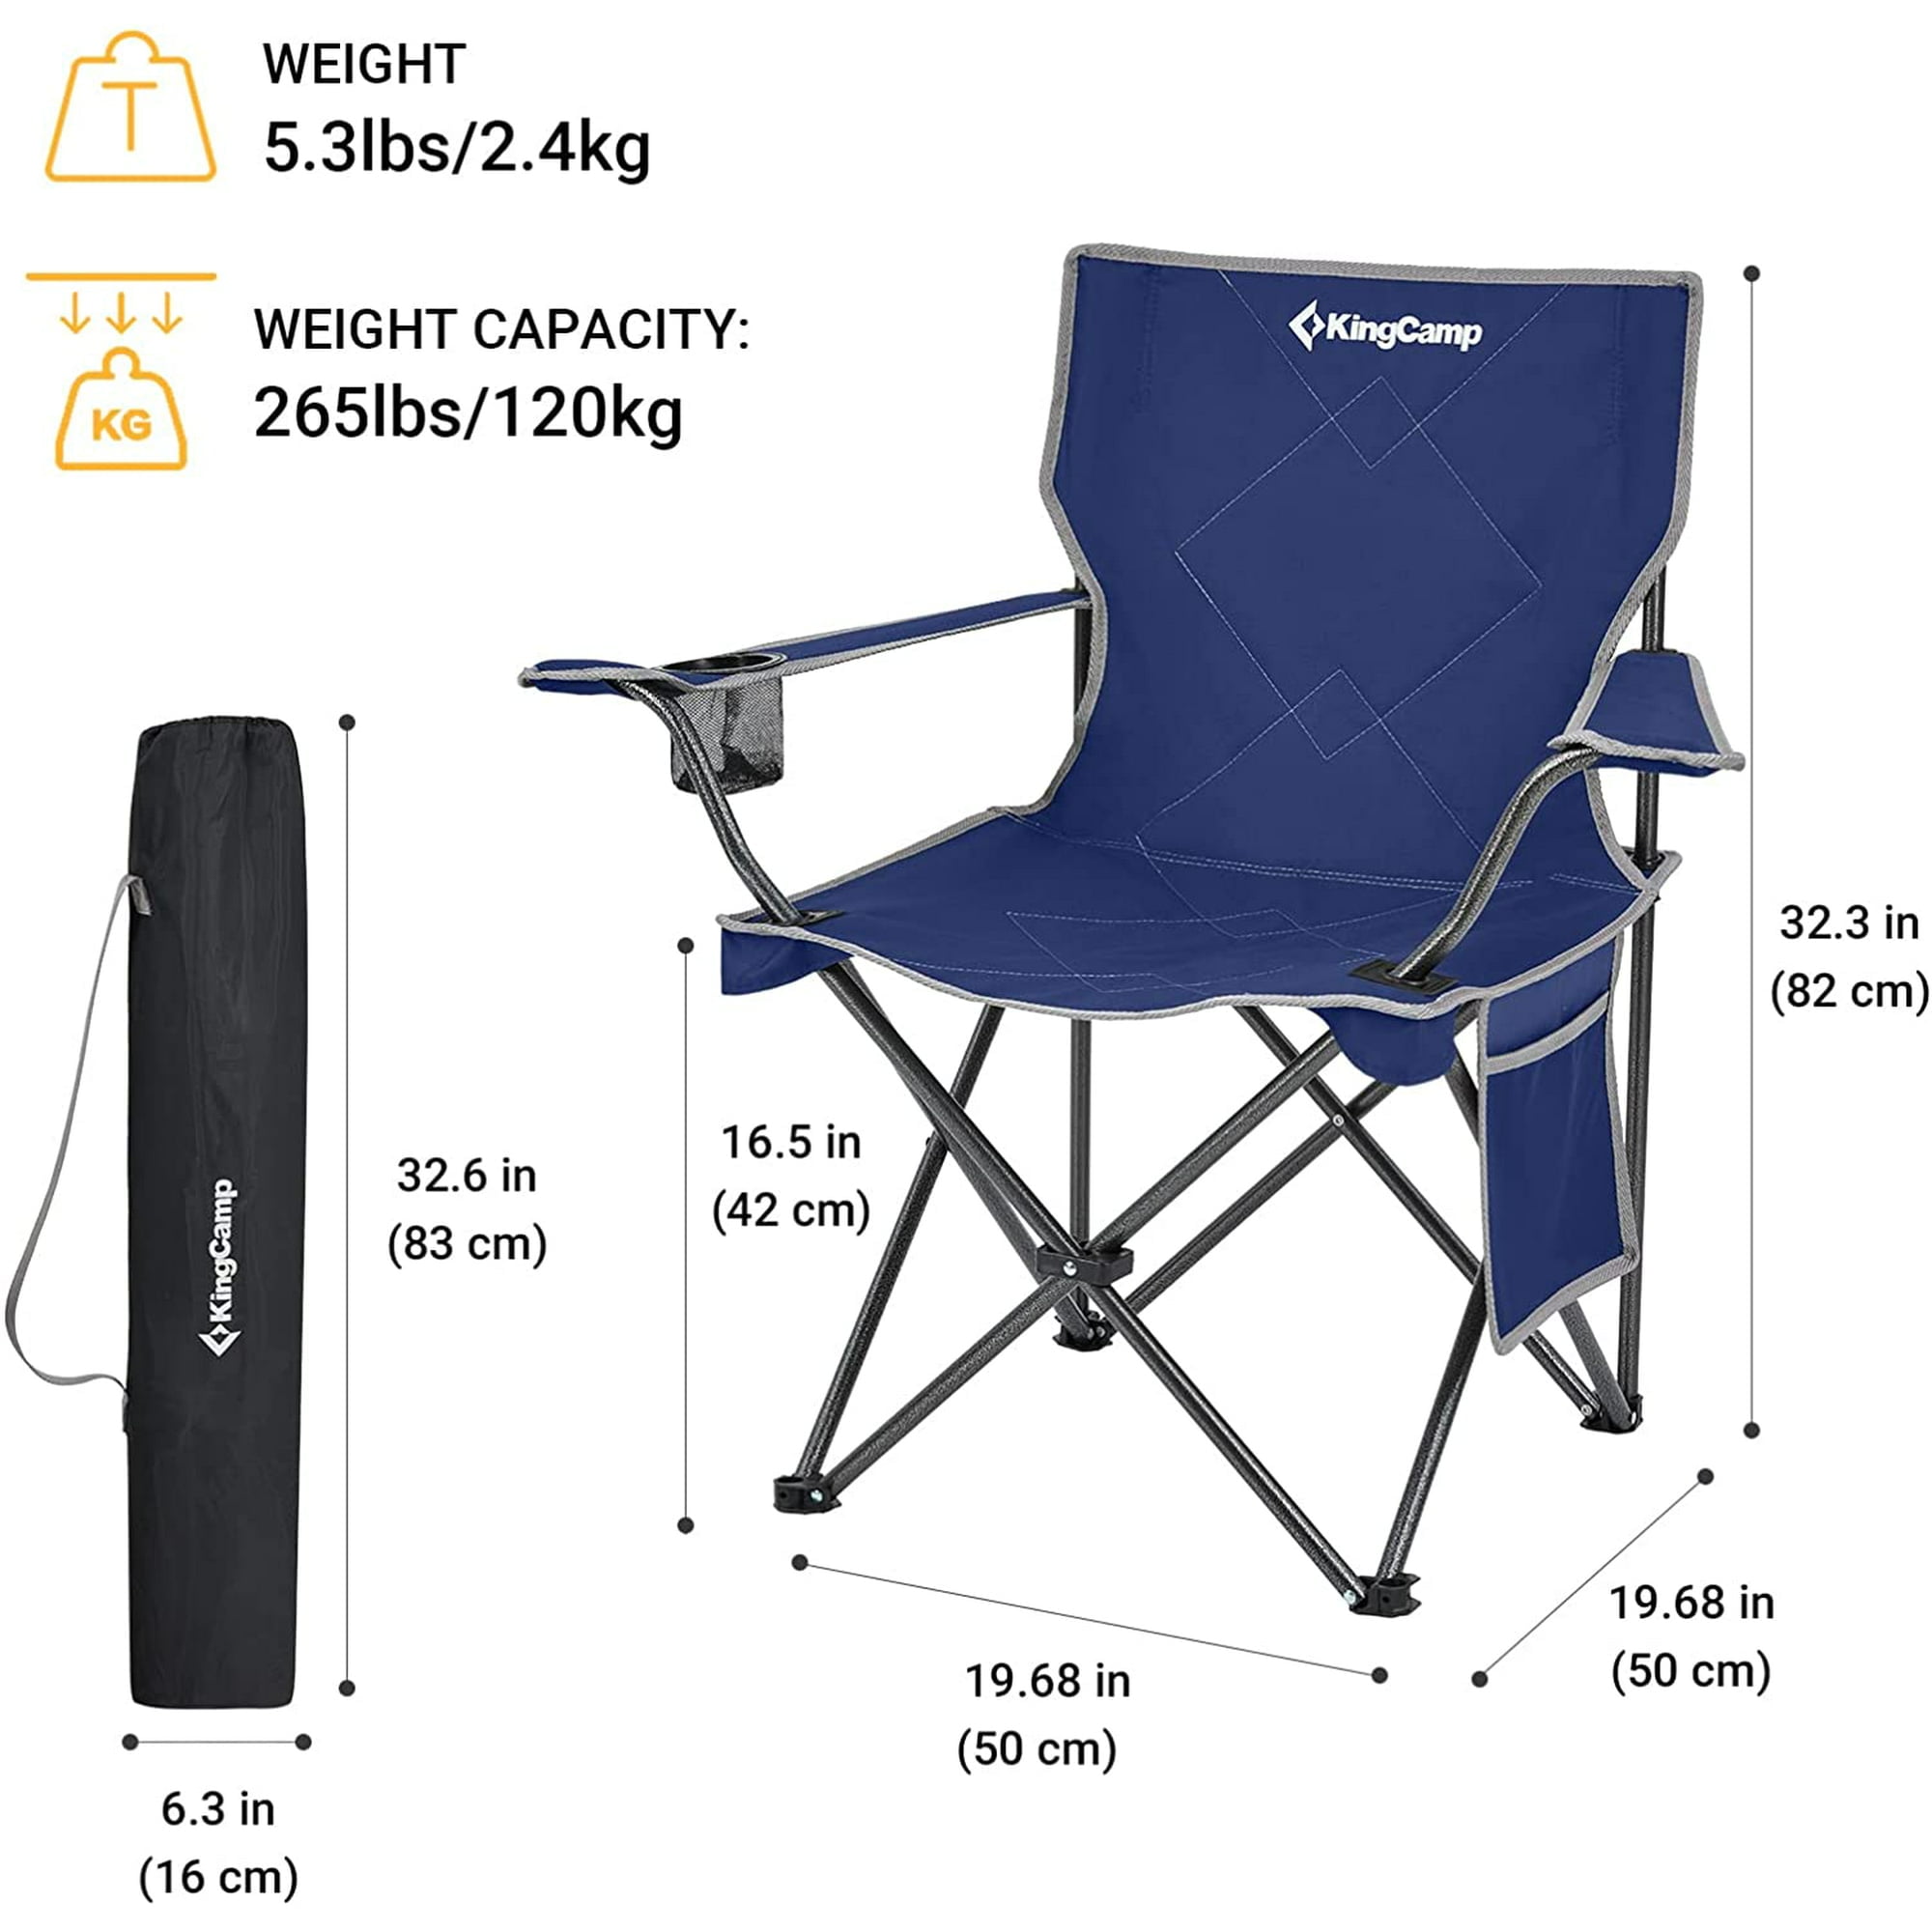  KINGBO 2 Pack Folding Camping Chairs - Portable Camp Chairs  with Cushion and Cup Holder, Folding Lawn Chairs for Adults, Heavy Duty Folding  Chairs for Outside Camping Hiking Fishing Beach, Black 